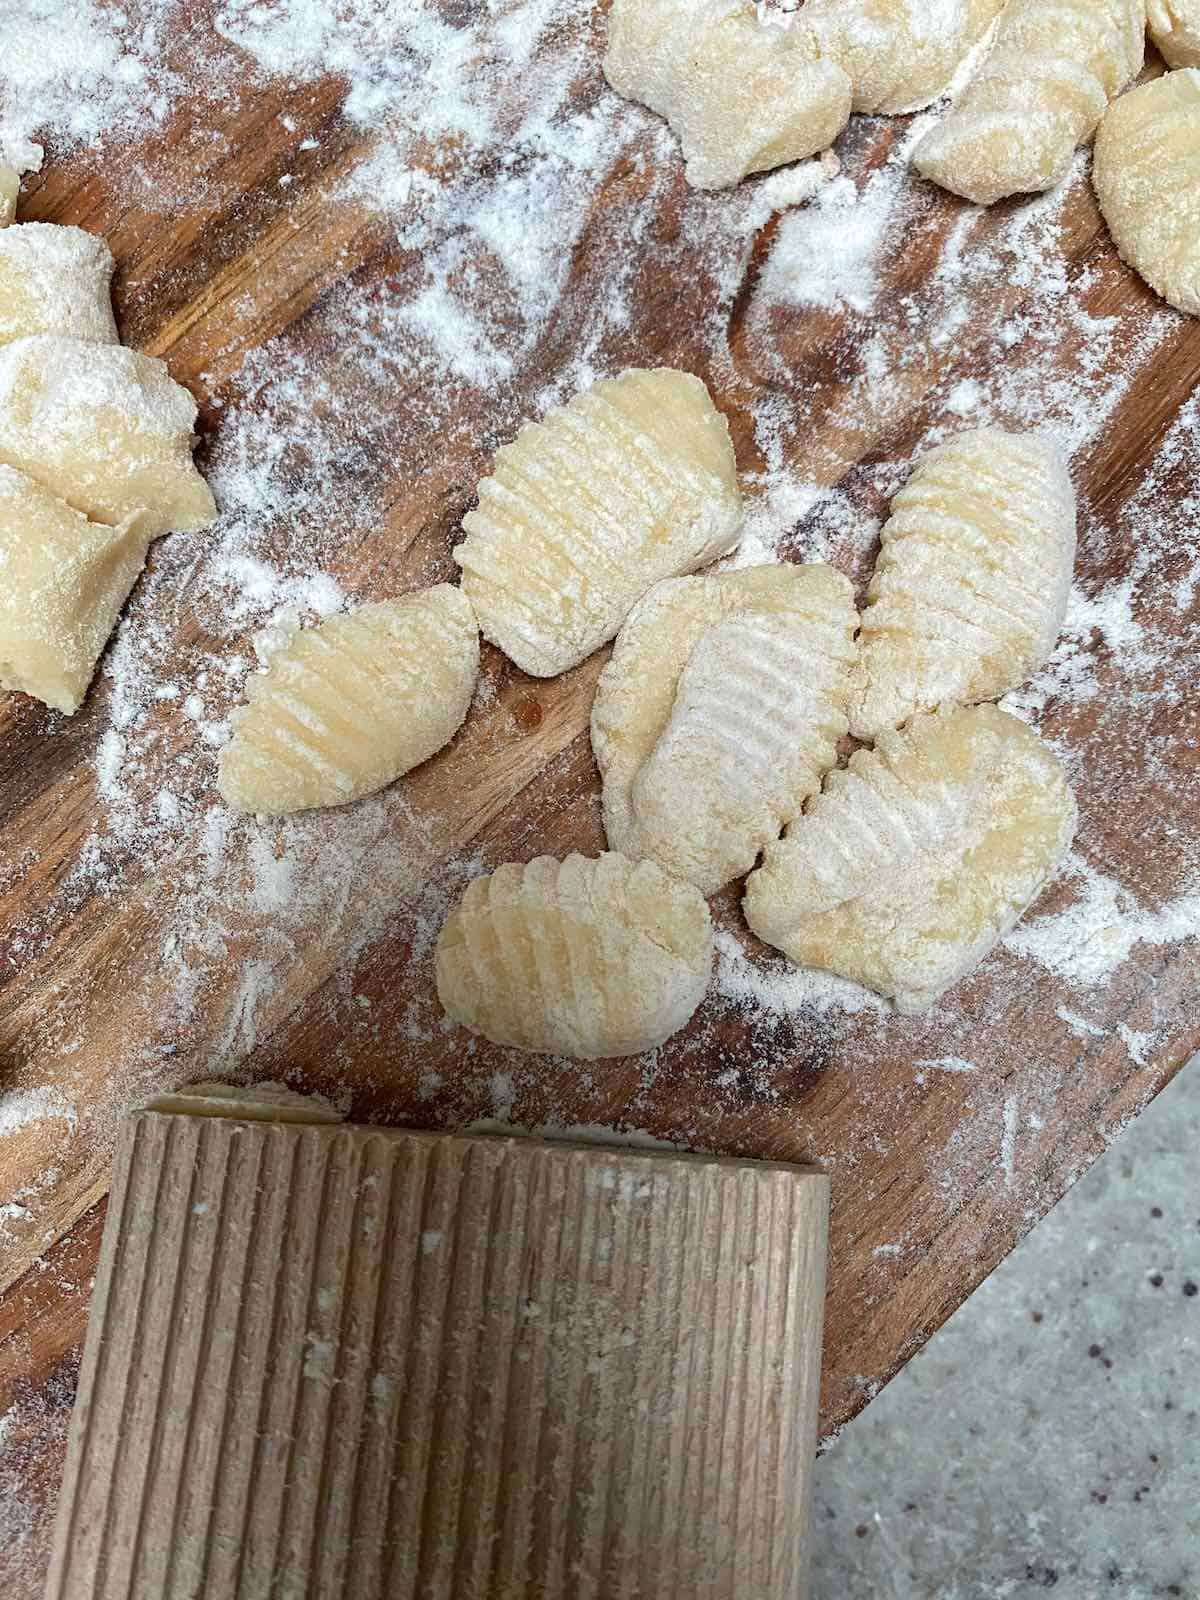 Gnocchi forms with a special tool